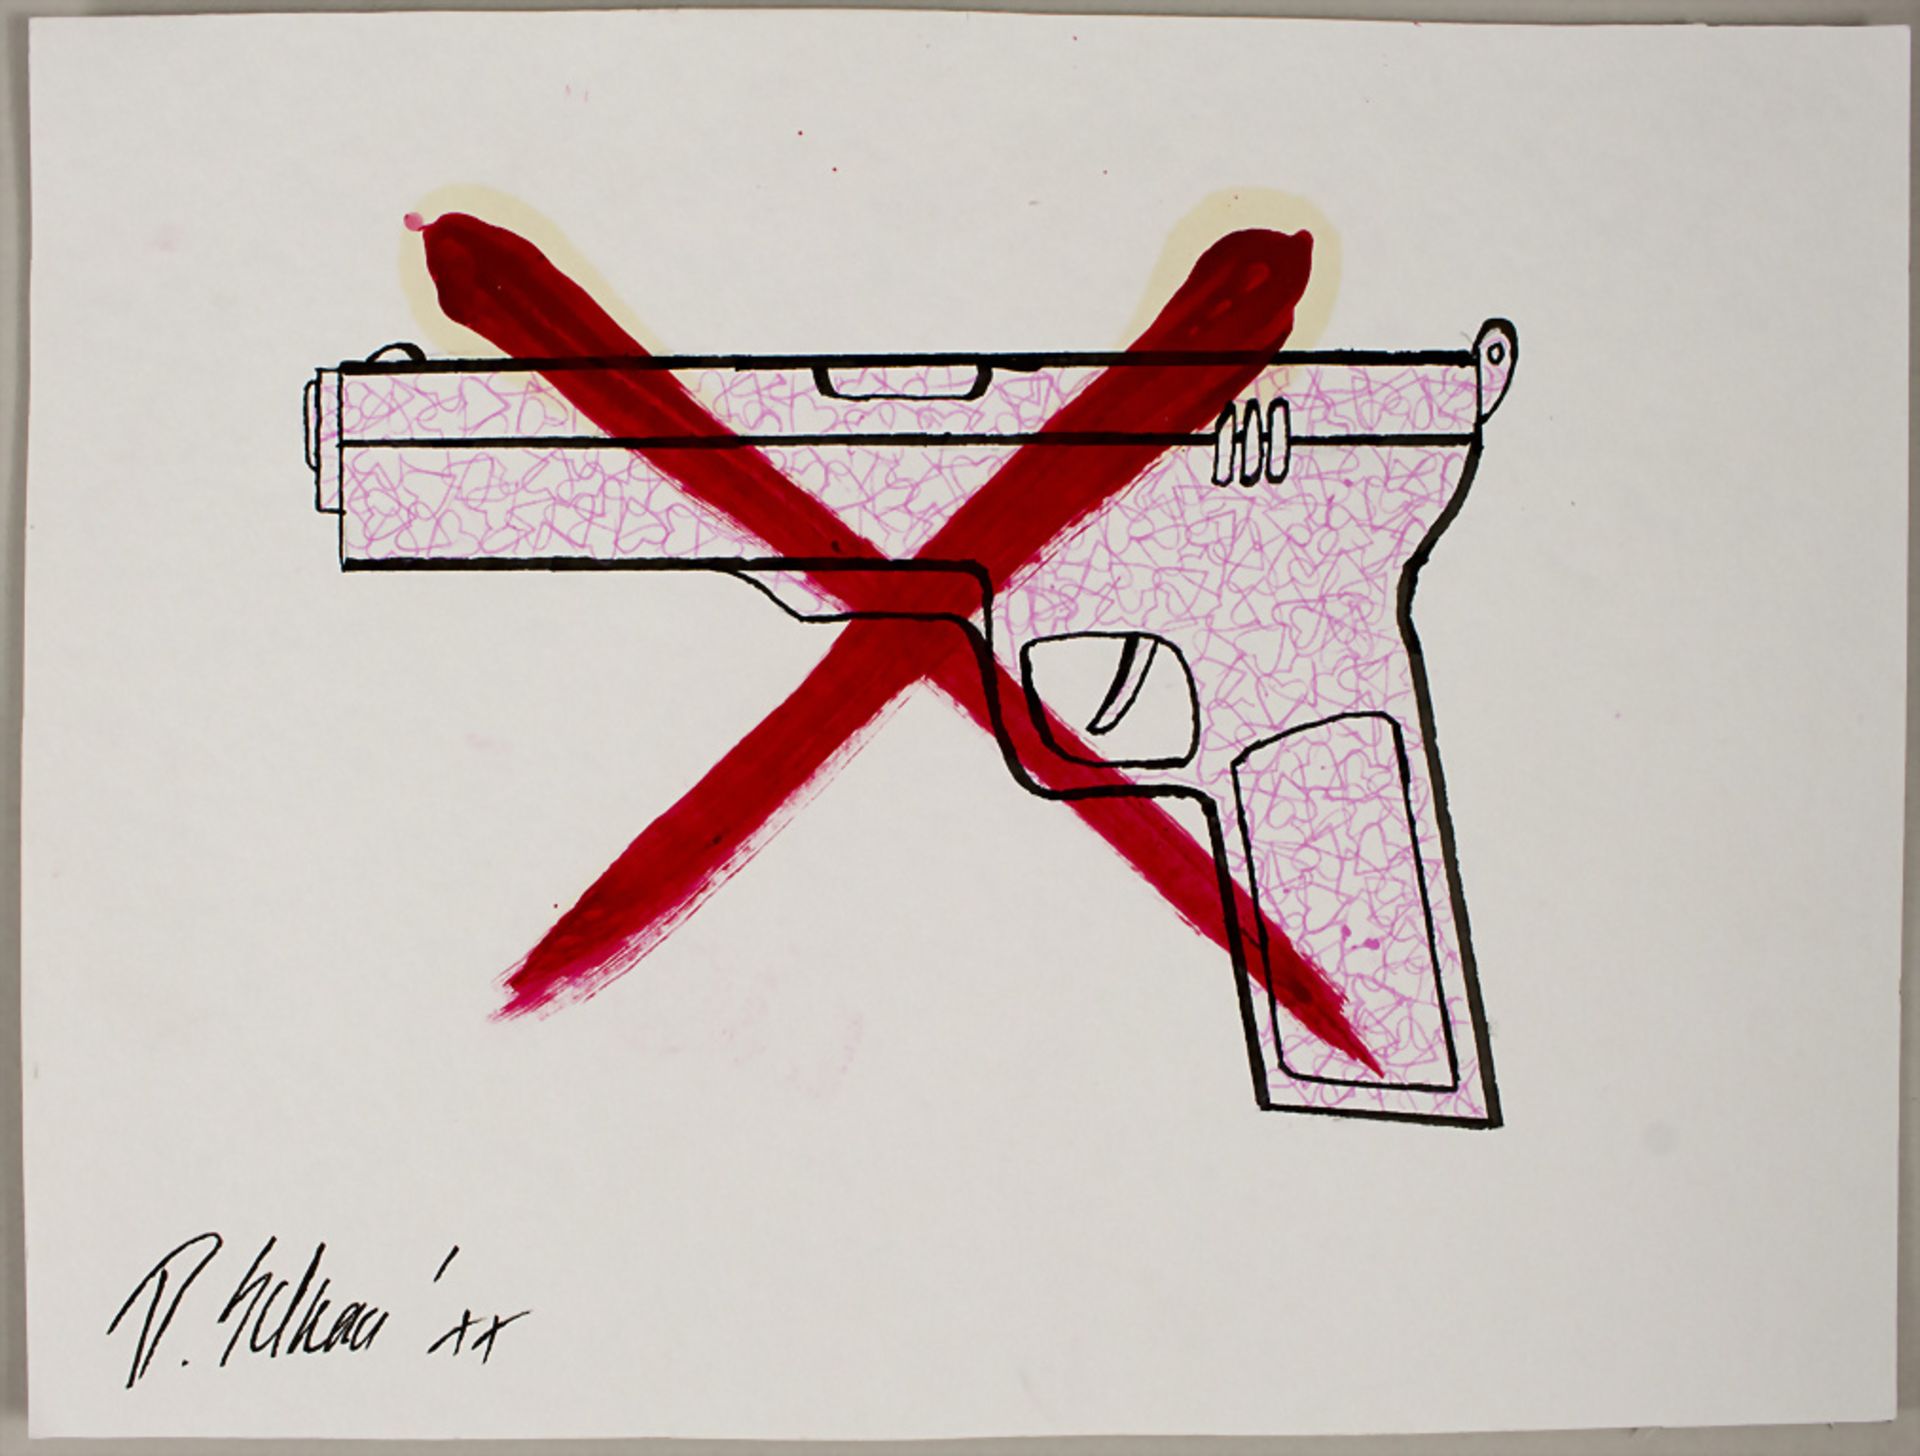 No place for weapons LOVE: Pistol